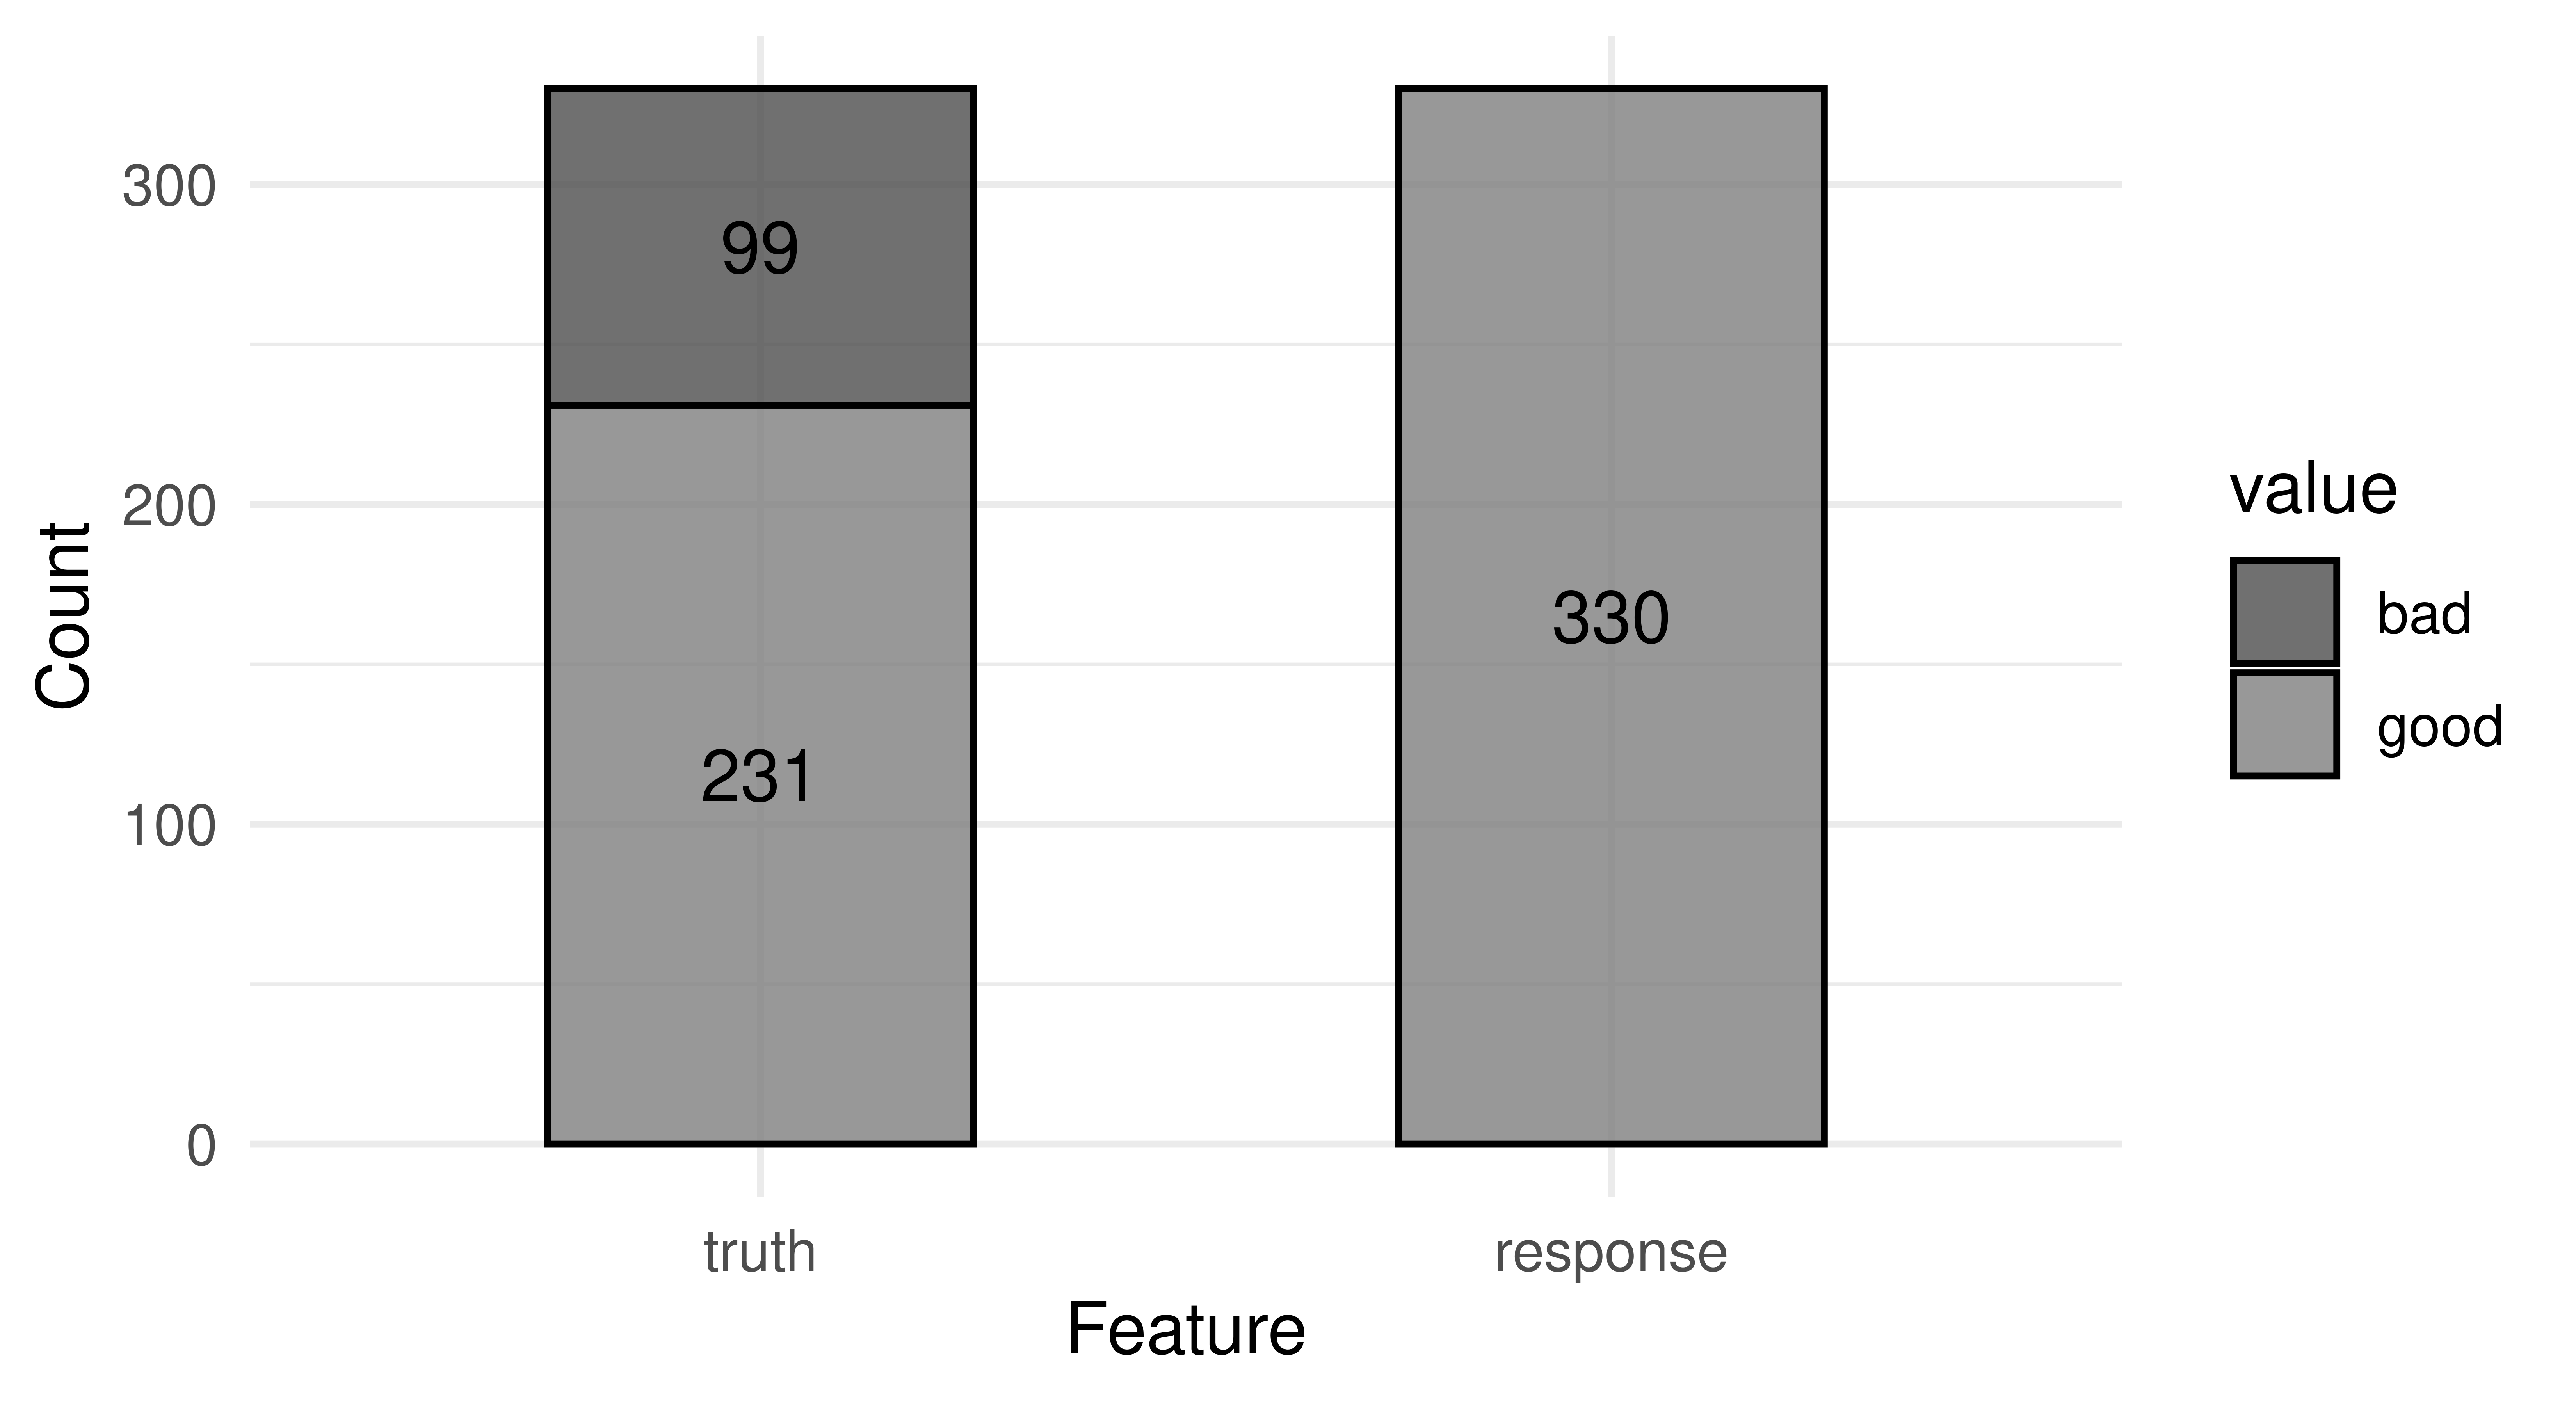 Two stacked bar plots. Bottom left corresponds to true number of 'good' customers (231) and top left is 'bad' customers (99). Right is a single bar corresponding to 330 'good' predictions, 'bad' is never predicted.